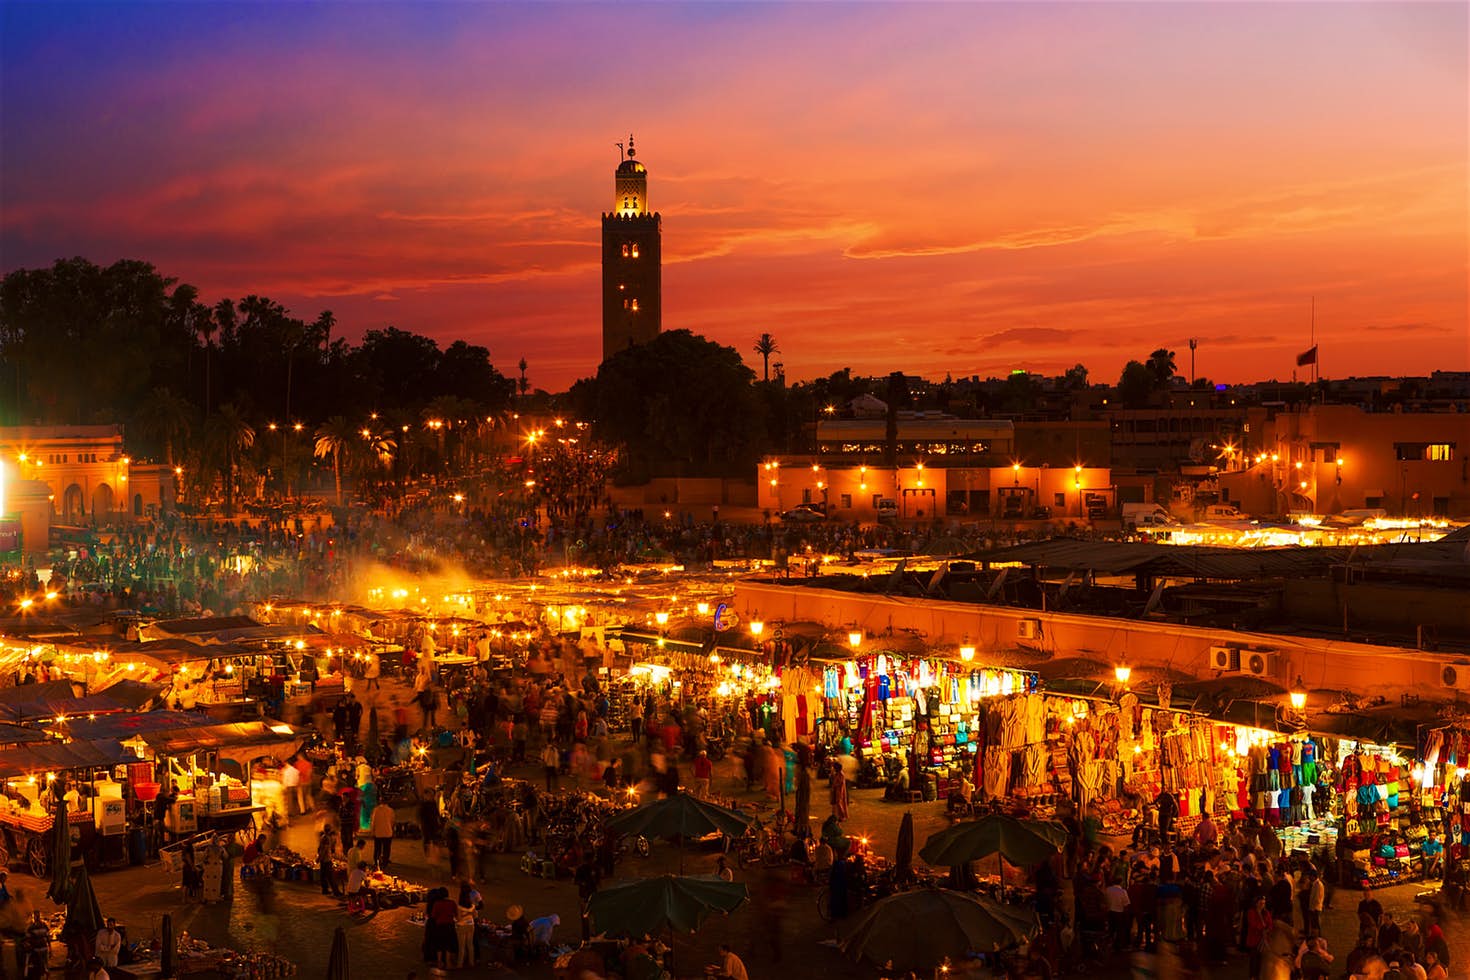 gallery image for Shared Guided Walking Tour Marrakech